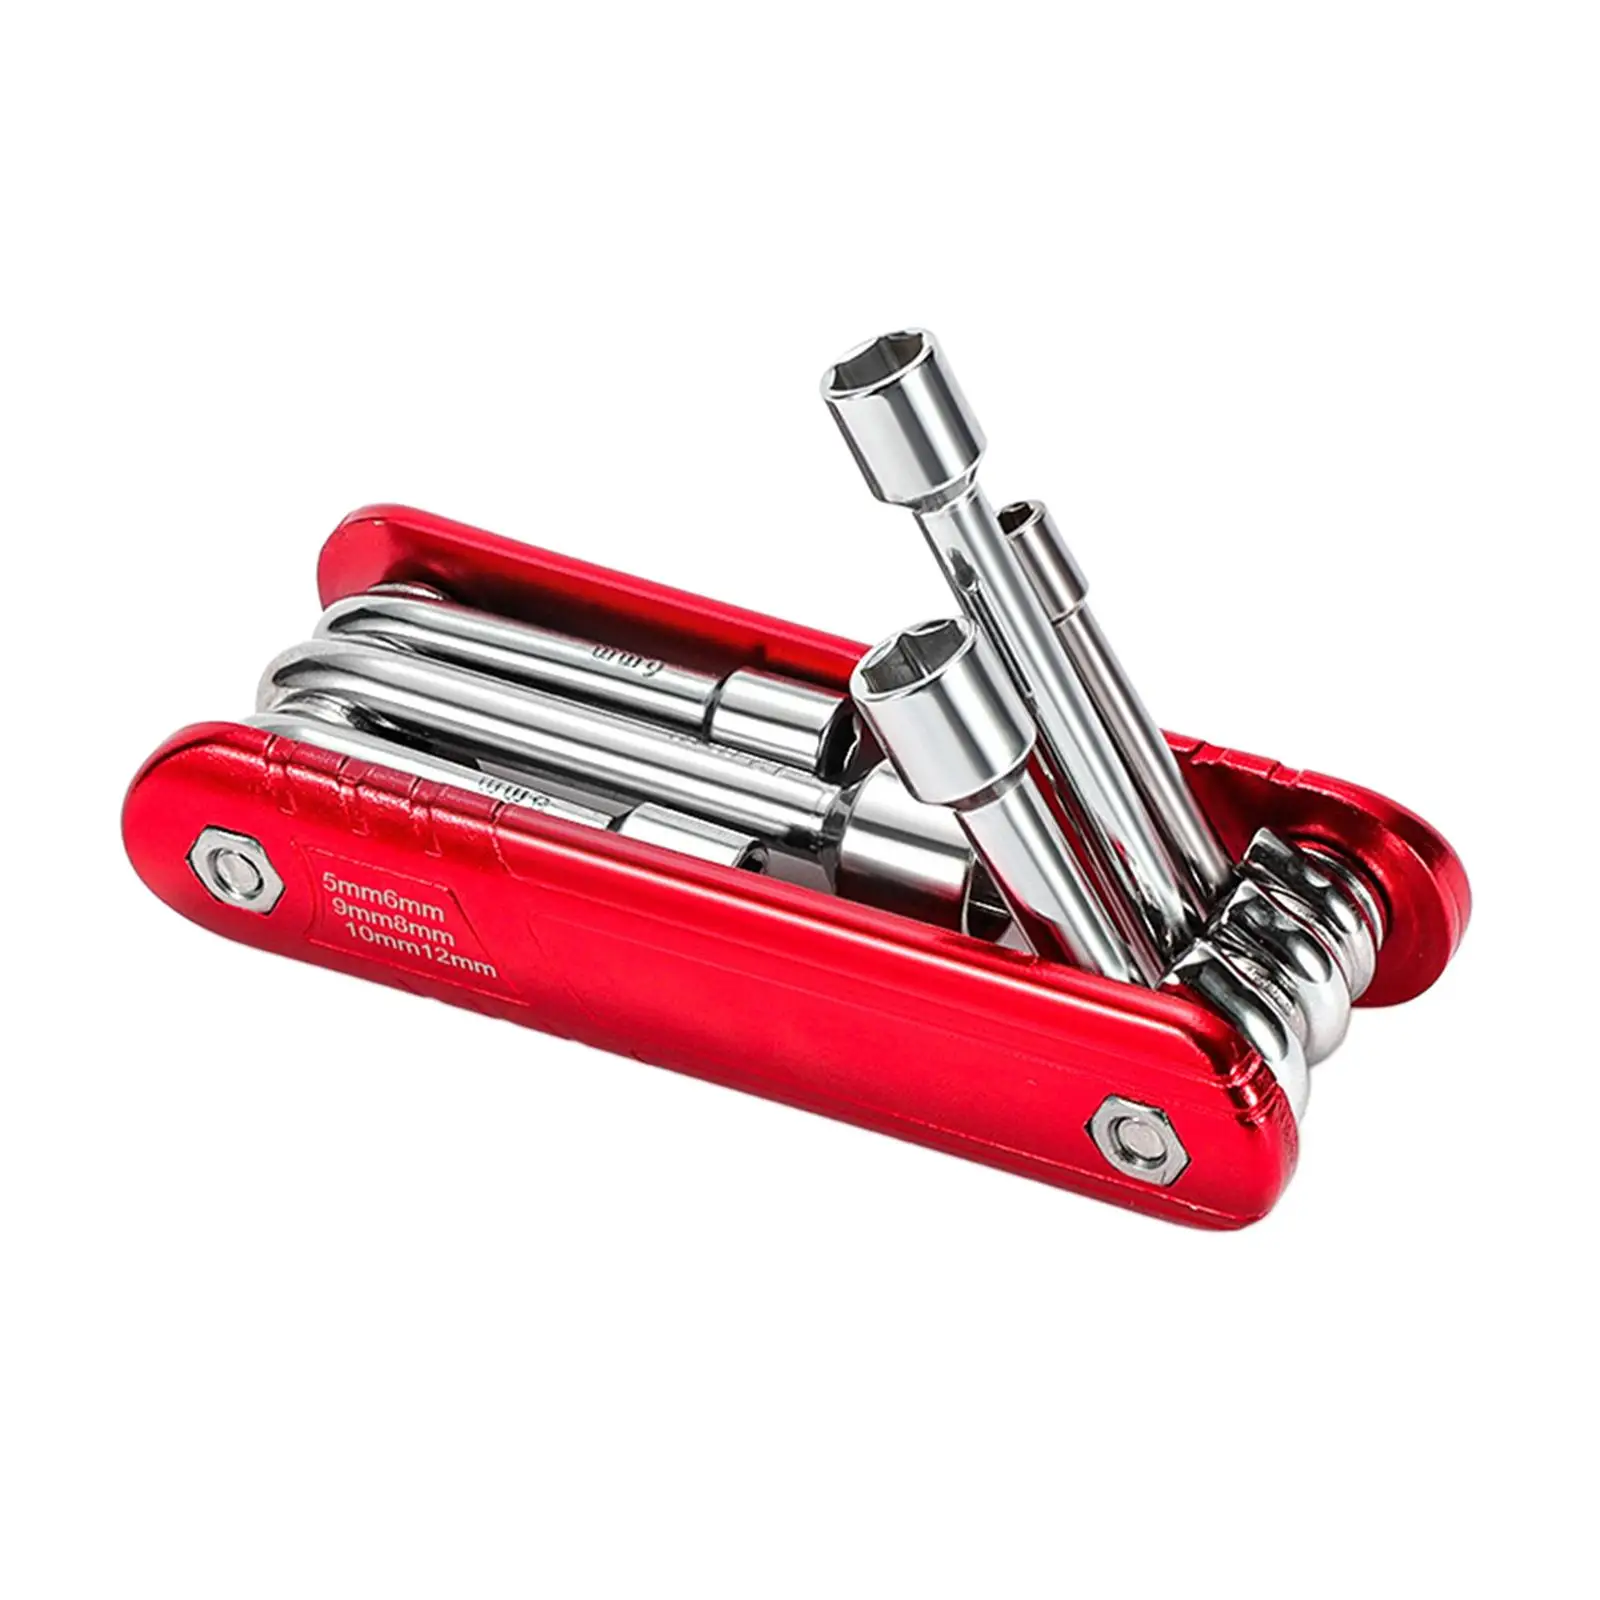 Folding Hex Socket Tool Set High Strength Household Metric Compact Universal Portable Hand Tools 6 in 1 Hex Nut Driver Set